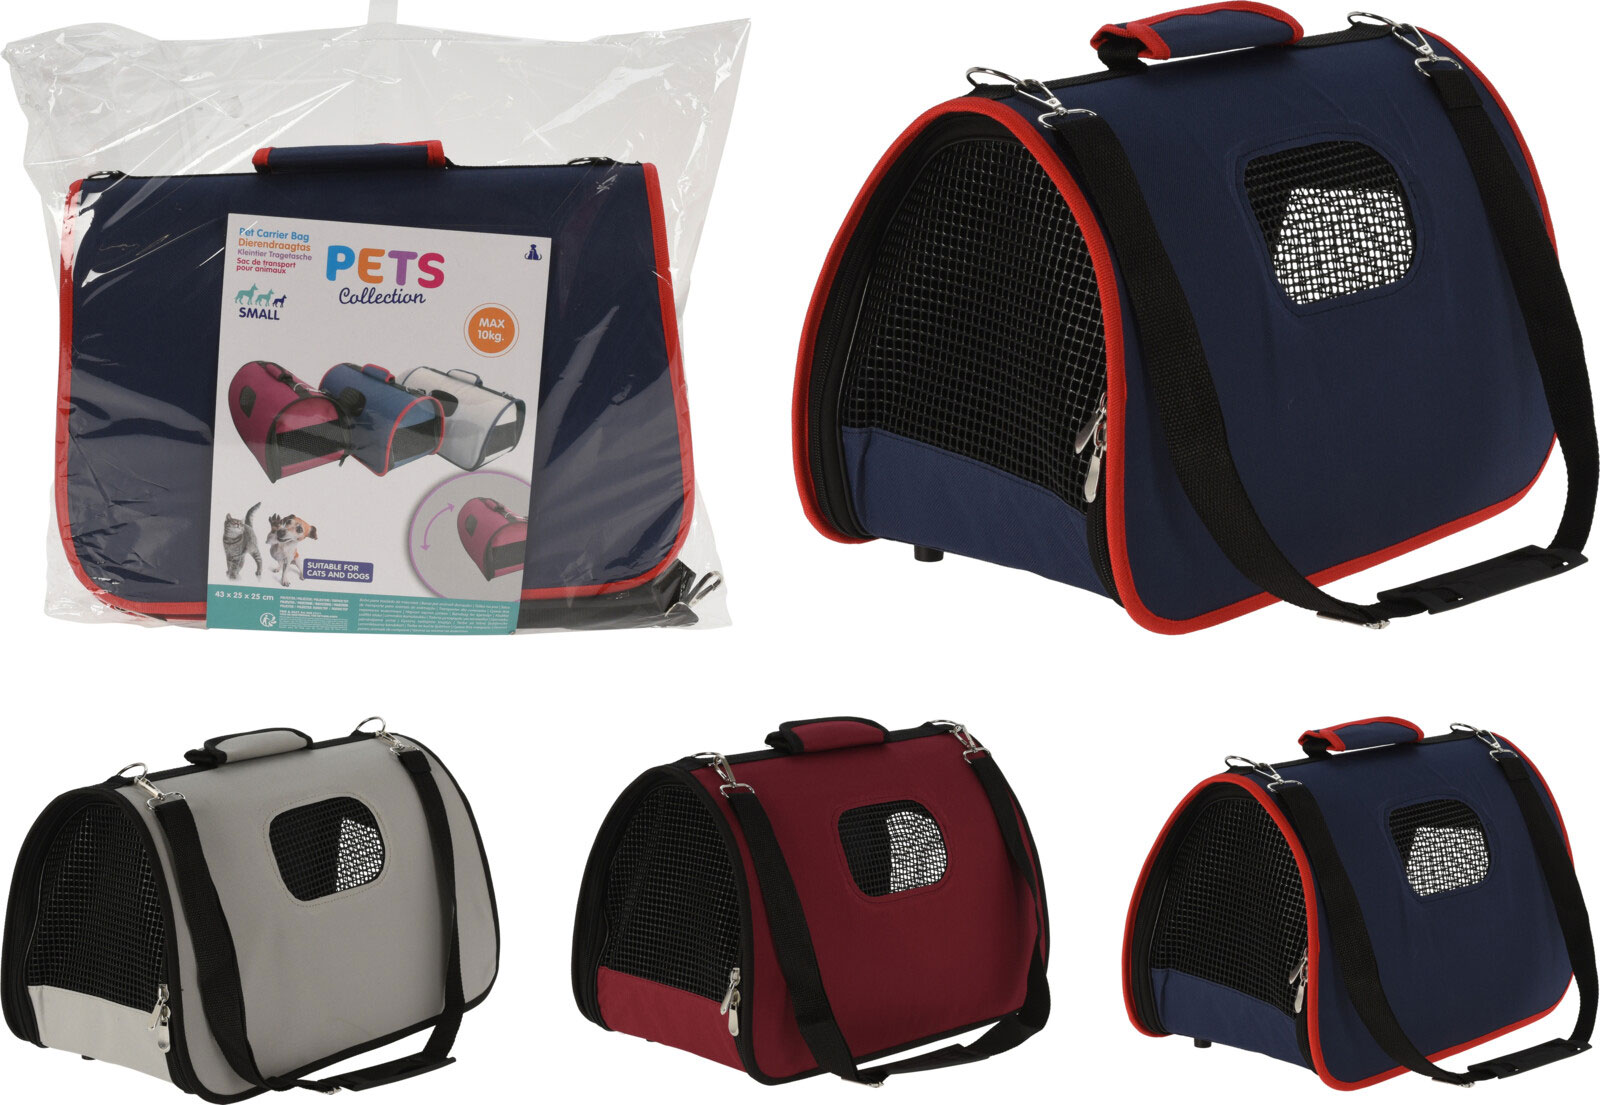 ANIMAL CARRY BAG 3 ASSORTED COLORS